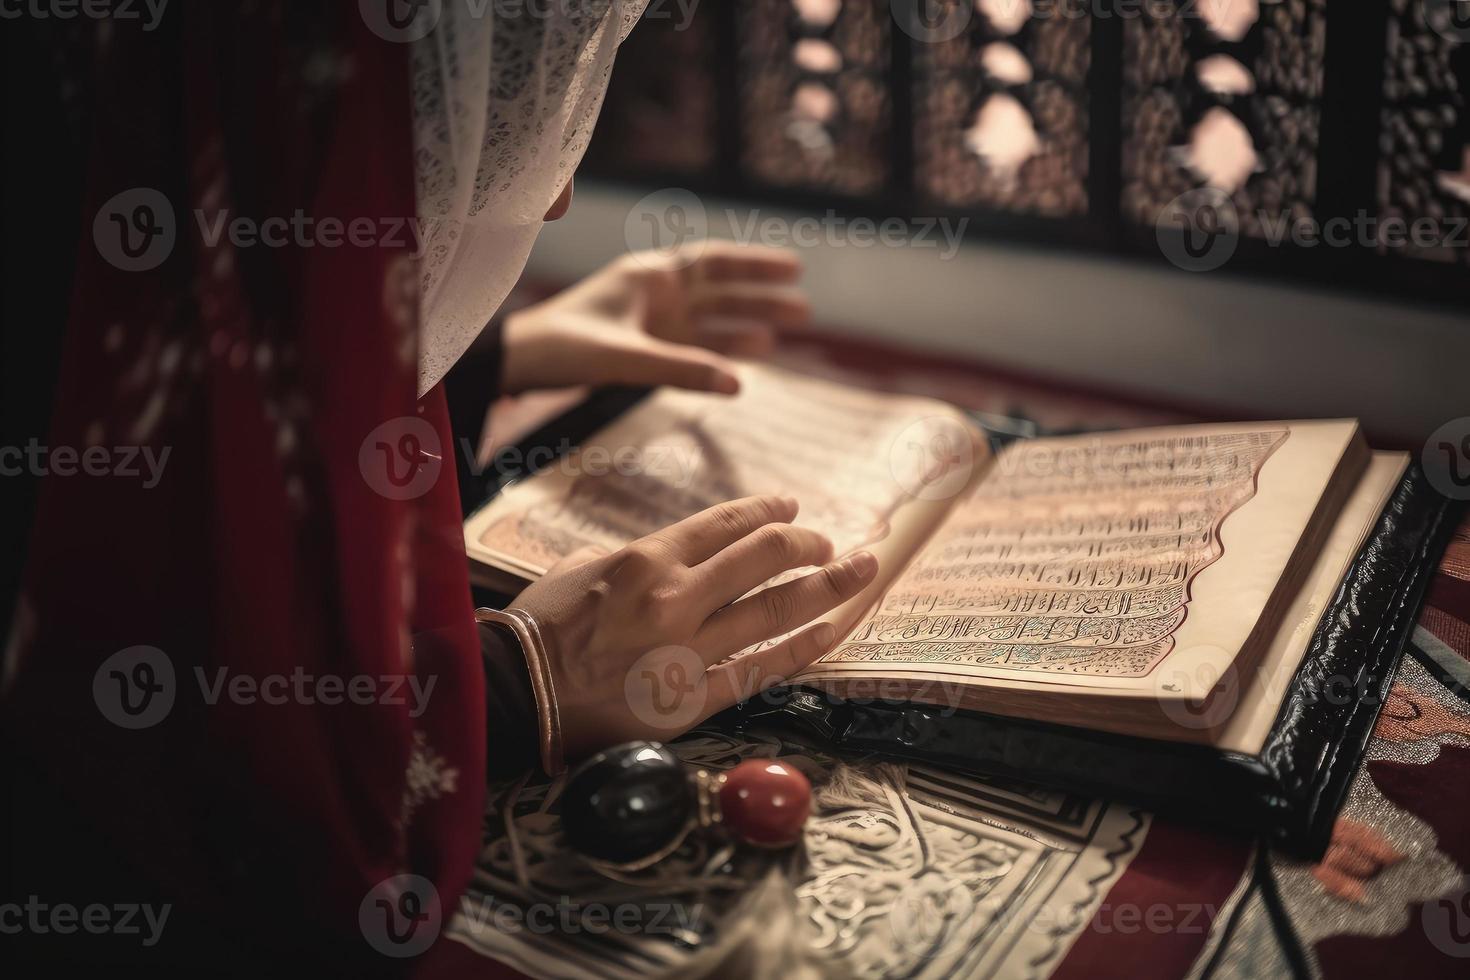 Muslim girl reading the holy book Quran on a prayer rug. A Muslim girl with a covered face and the Quran, the holy book of Islam. Ramadan prayer concept illustration with prayer beads. photo